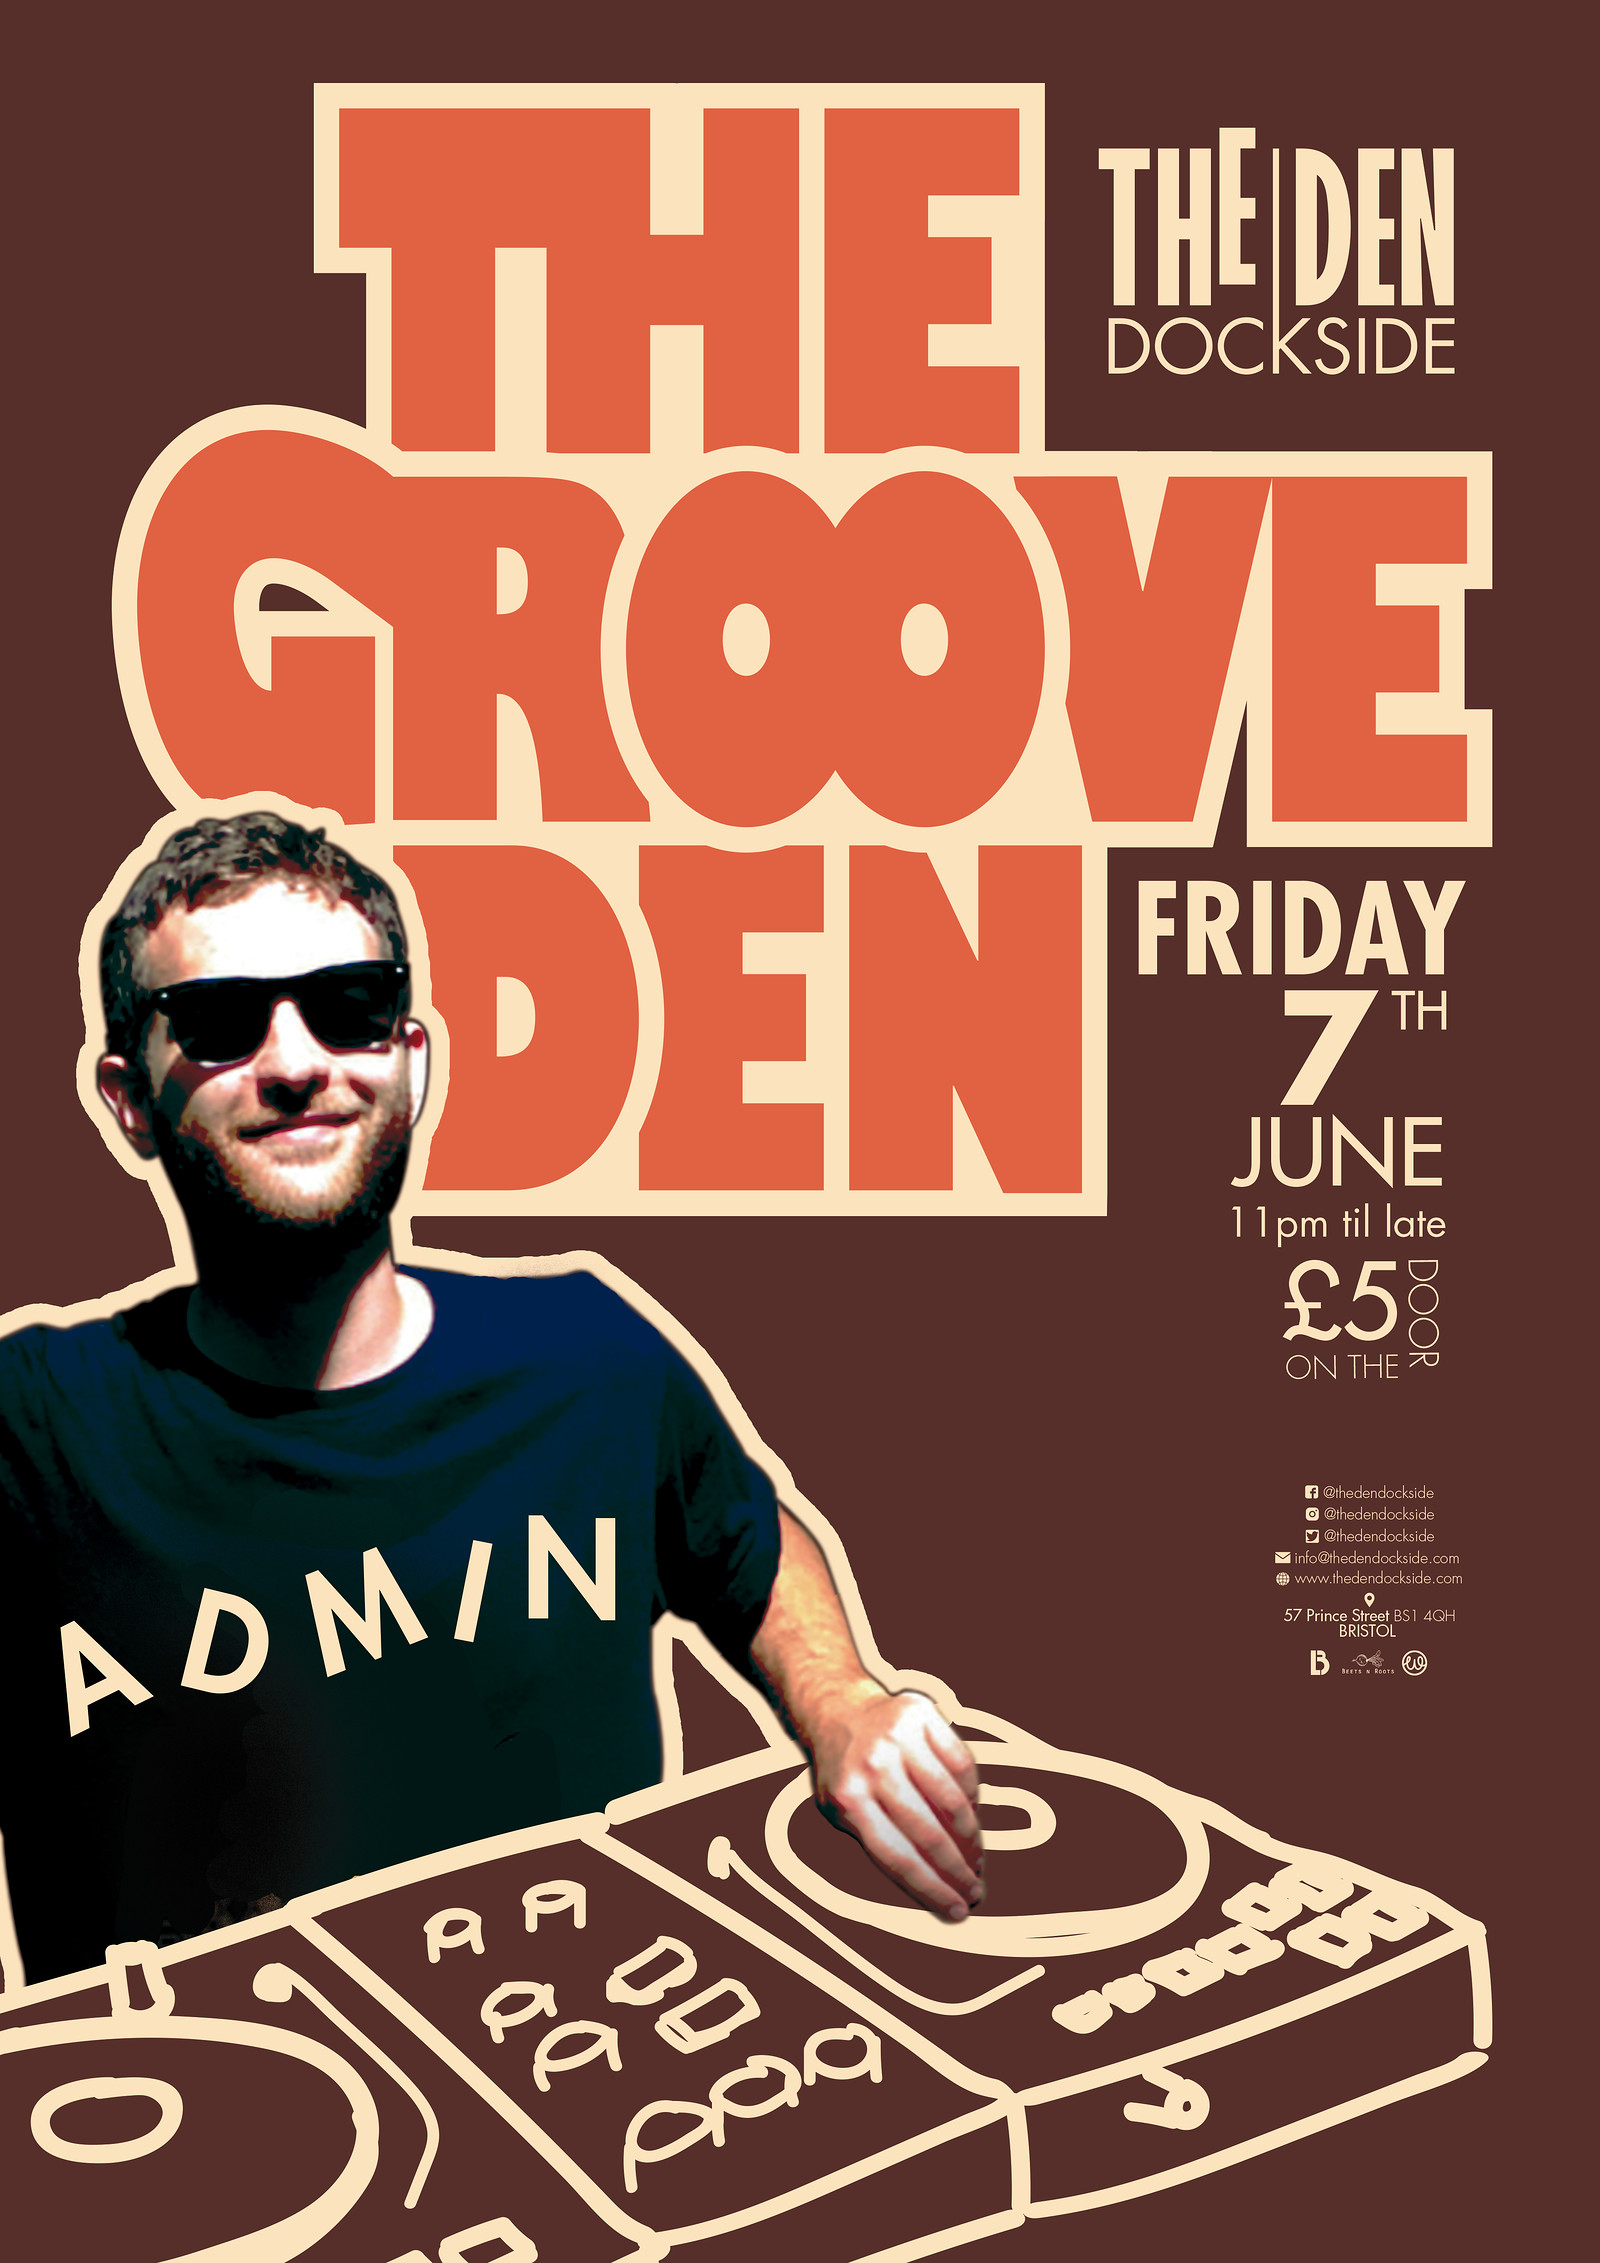 The Groove Den, Featuring Admin at The Den - Dockside